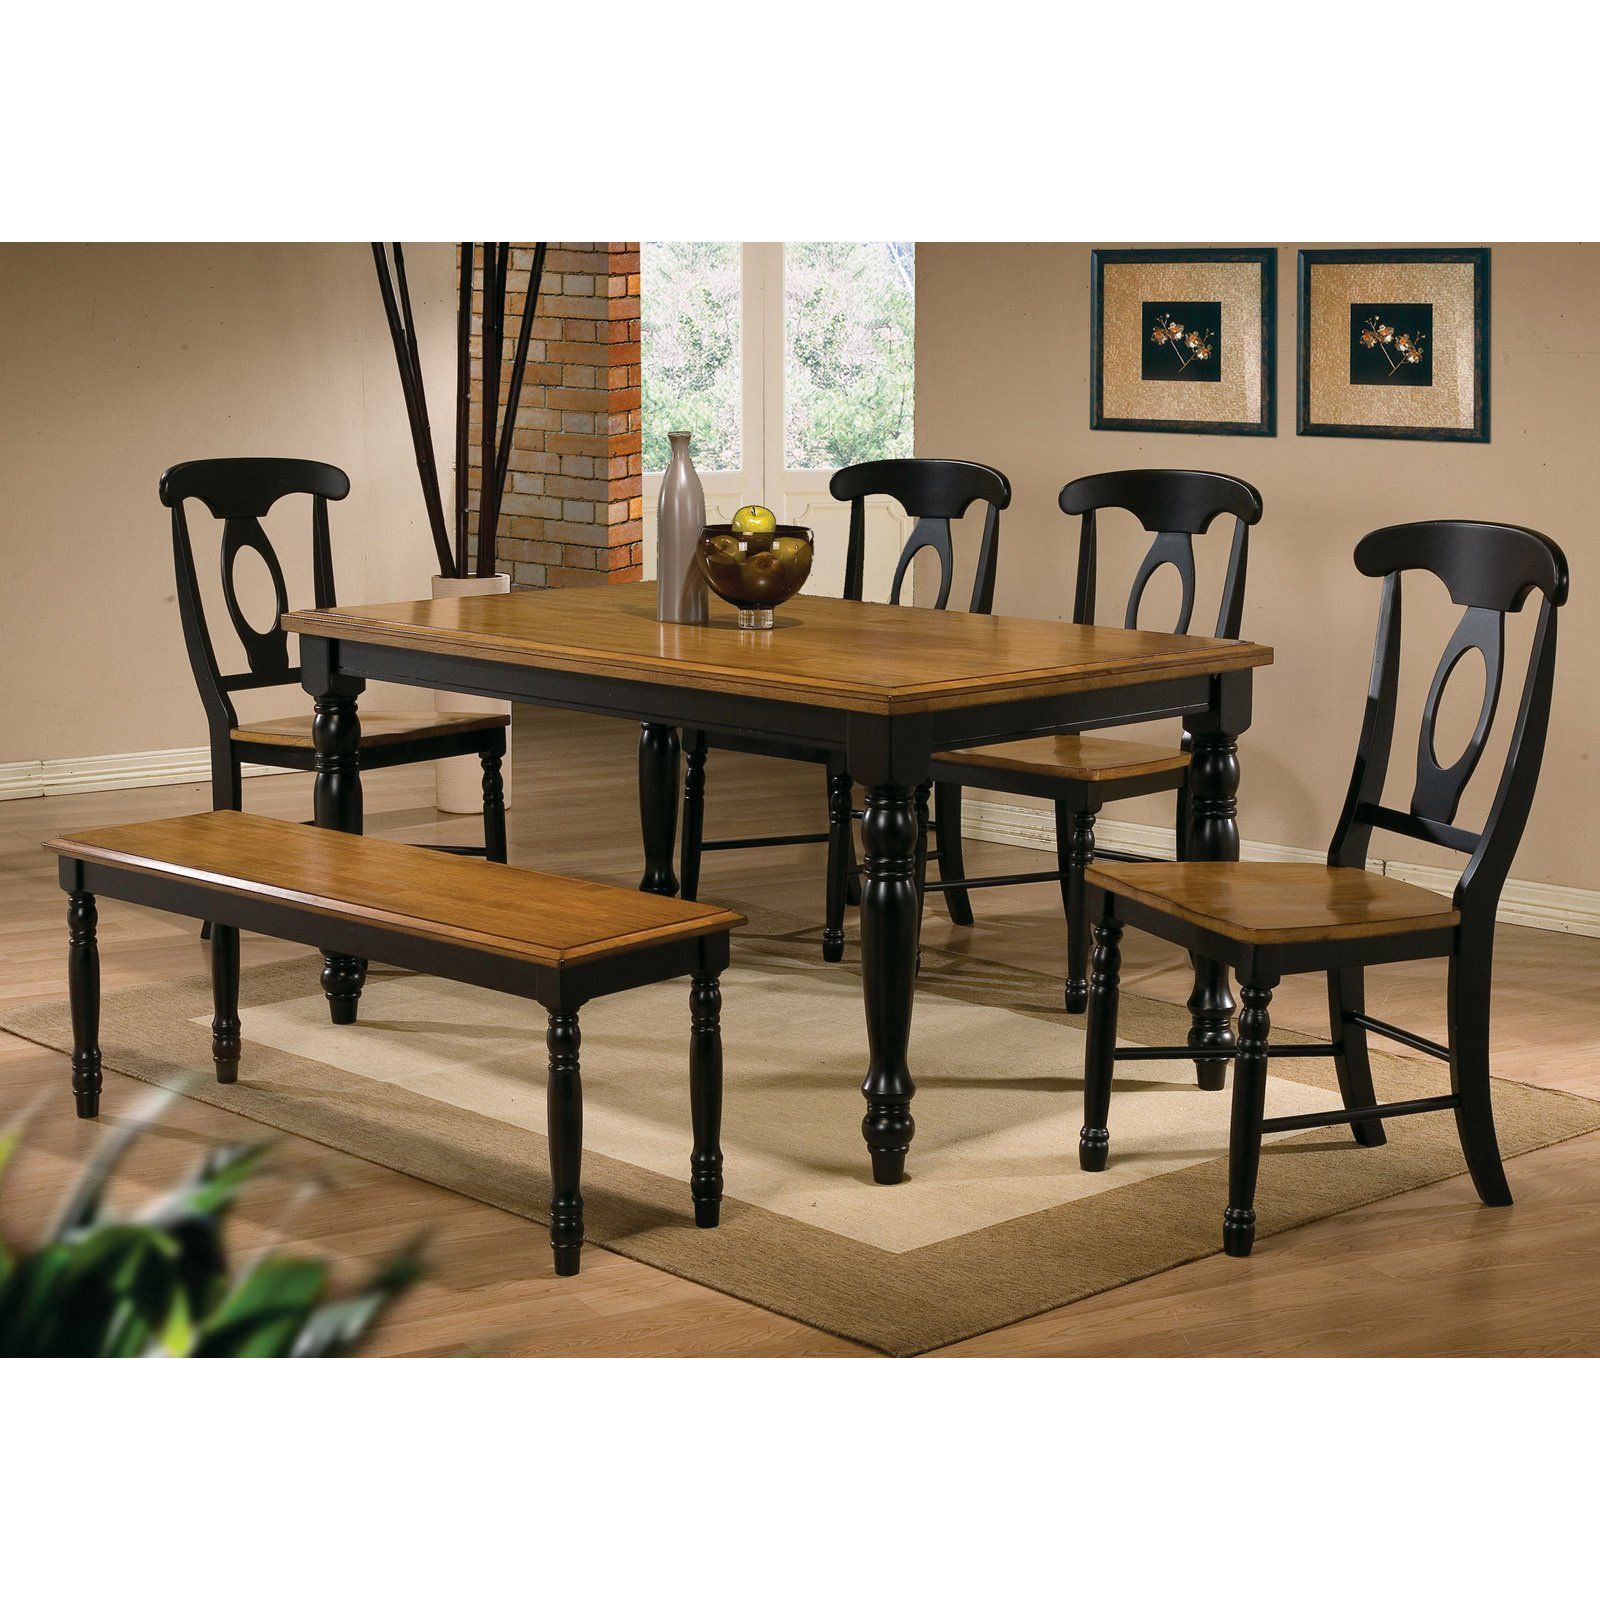 Ashley Furniture – Conover Dining Room Table | Dining Room Furniture Inside Latest Conover 5 Piece Dining Sets (View 18 of 20)